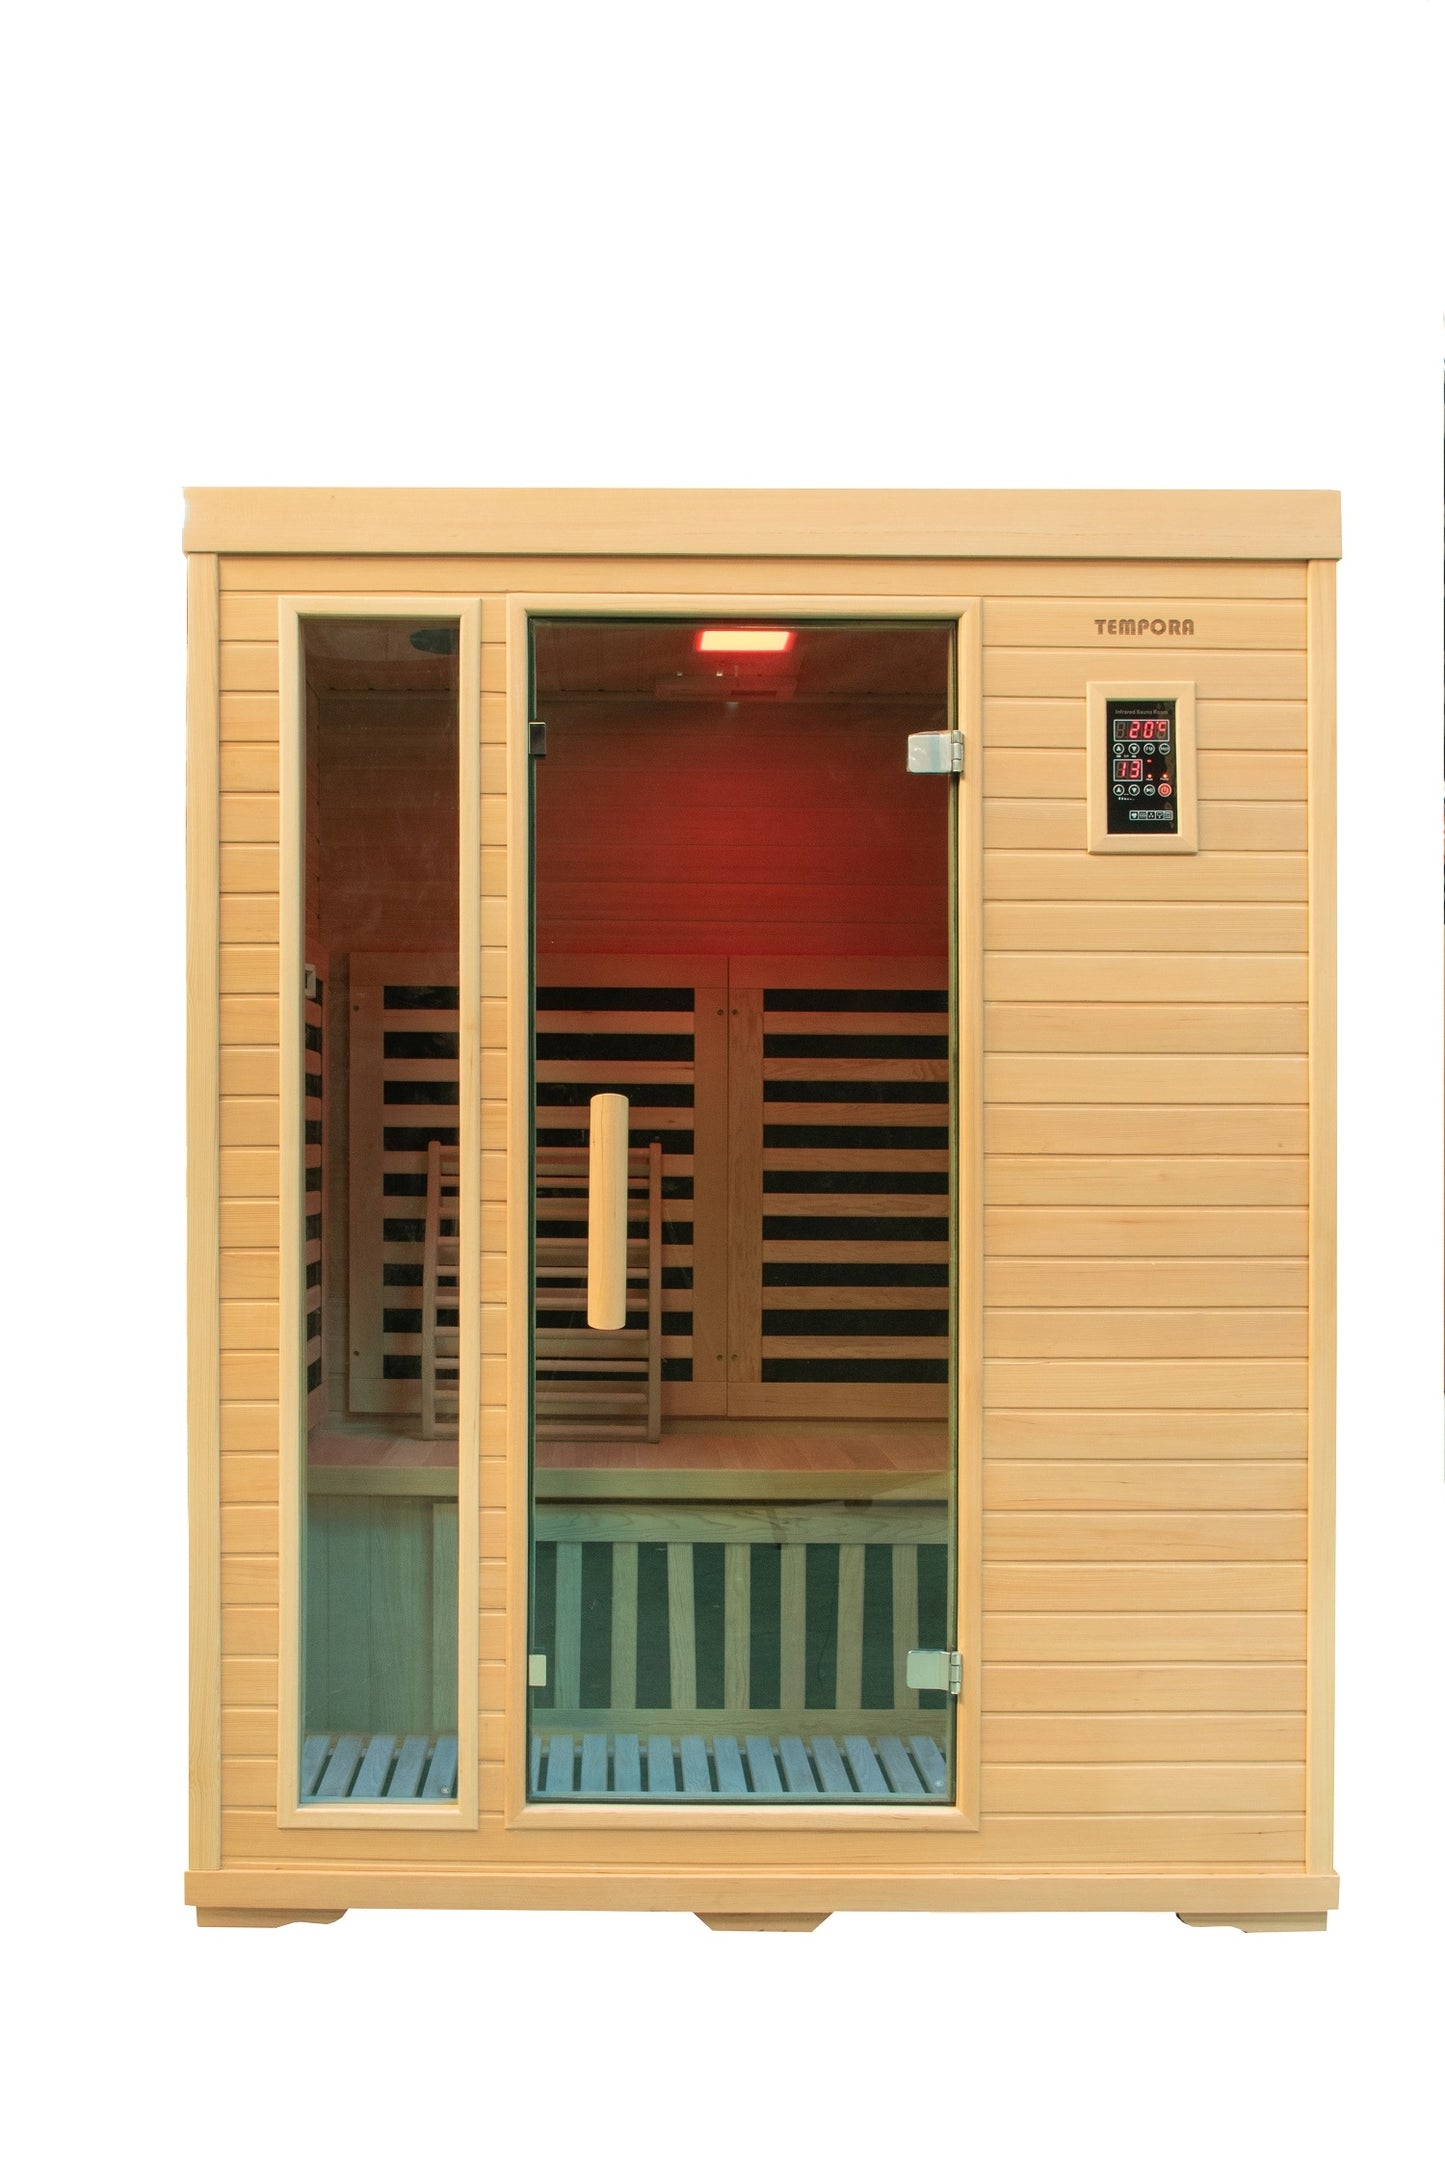 3 Person Luxury Carbon Fibre Infrared Sauna 8 Heating Panels 003F